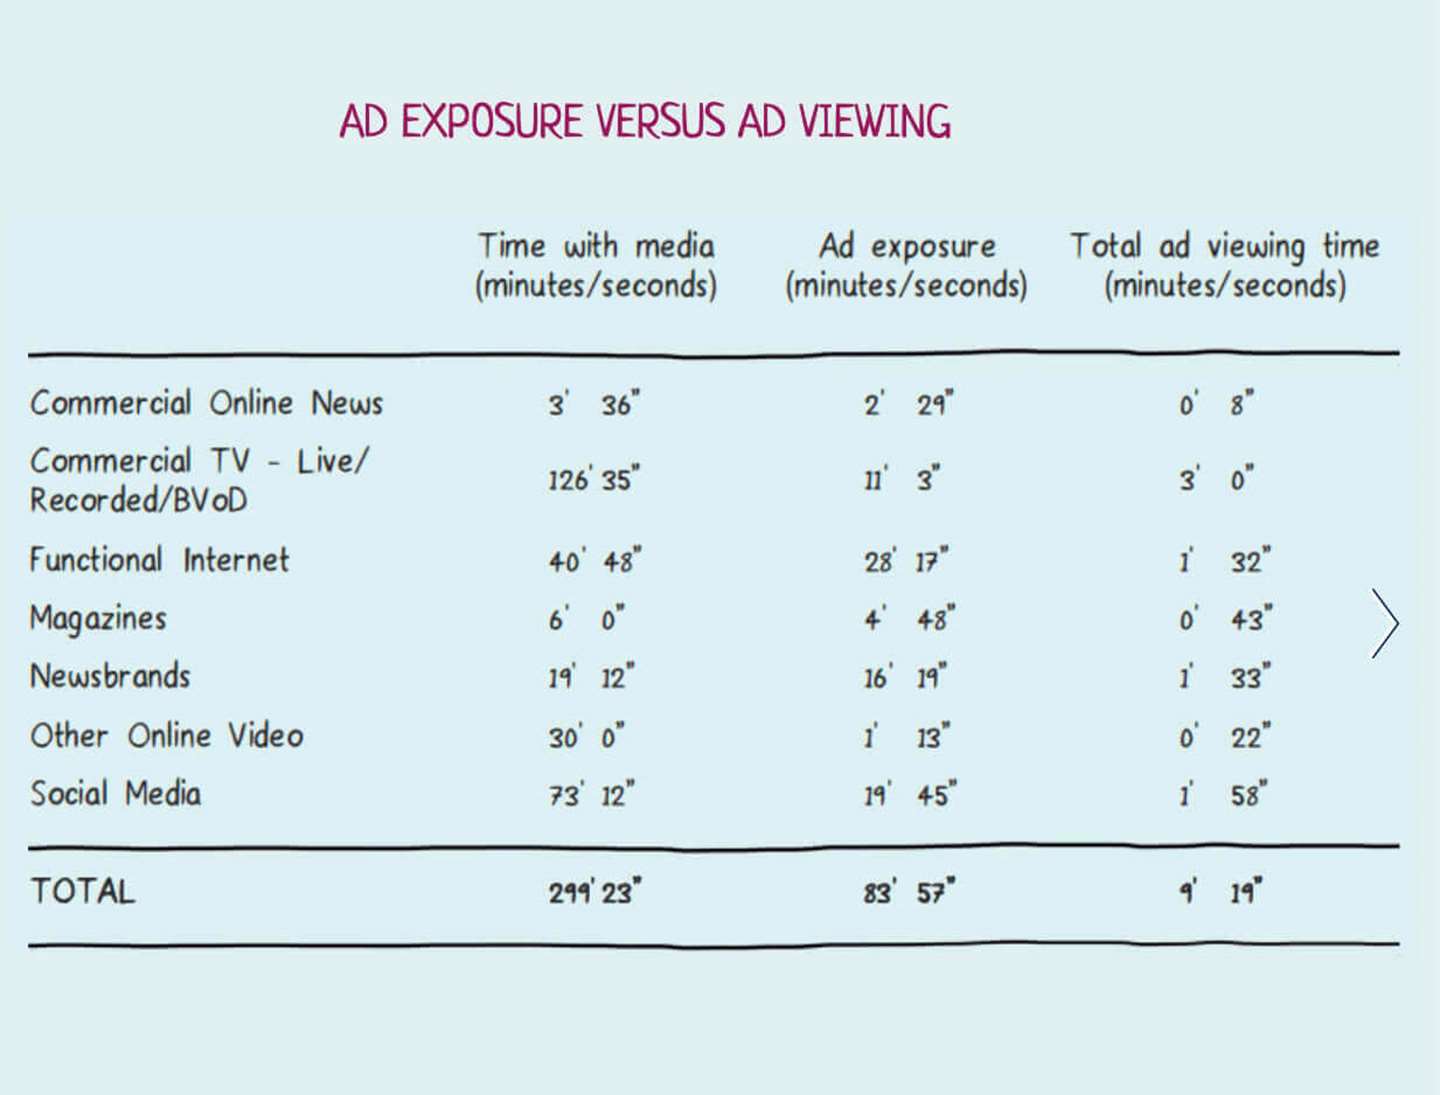 Attention exposure and viewing time of various advertising channels_2.jpeg